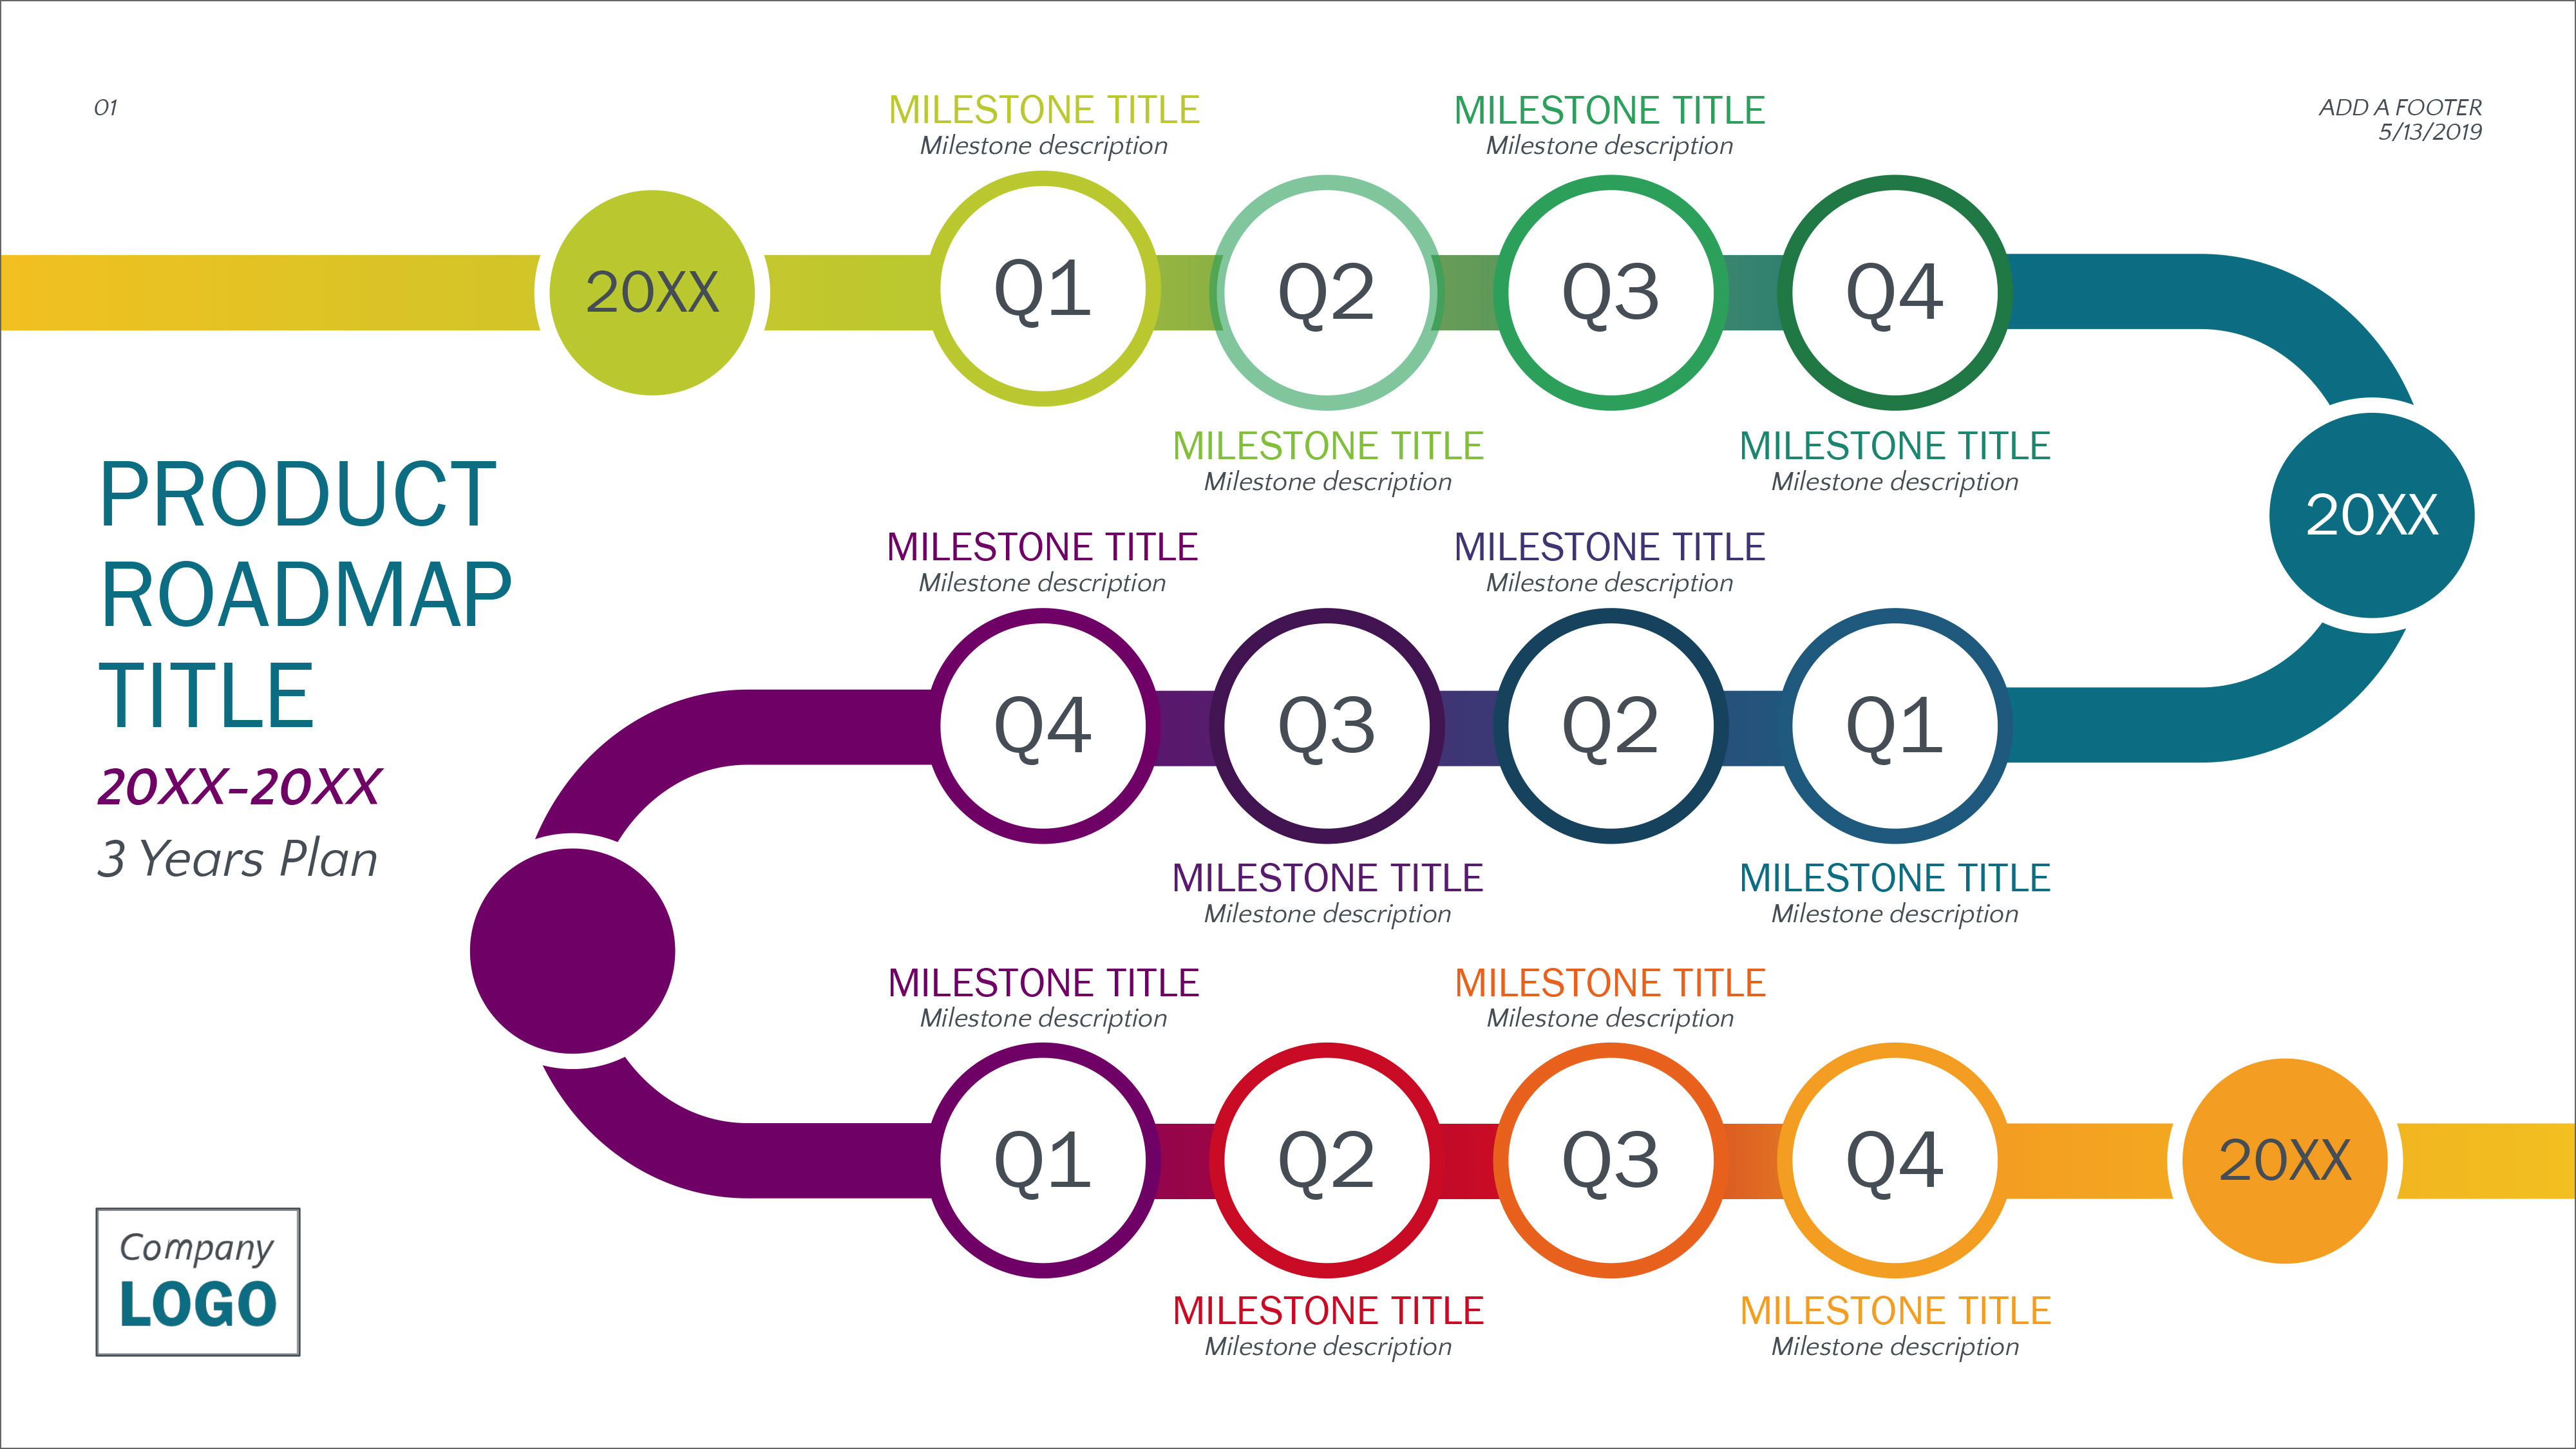 powerpoint timeline template